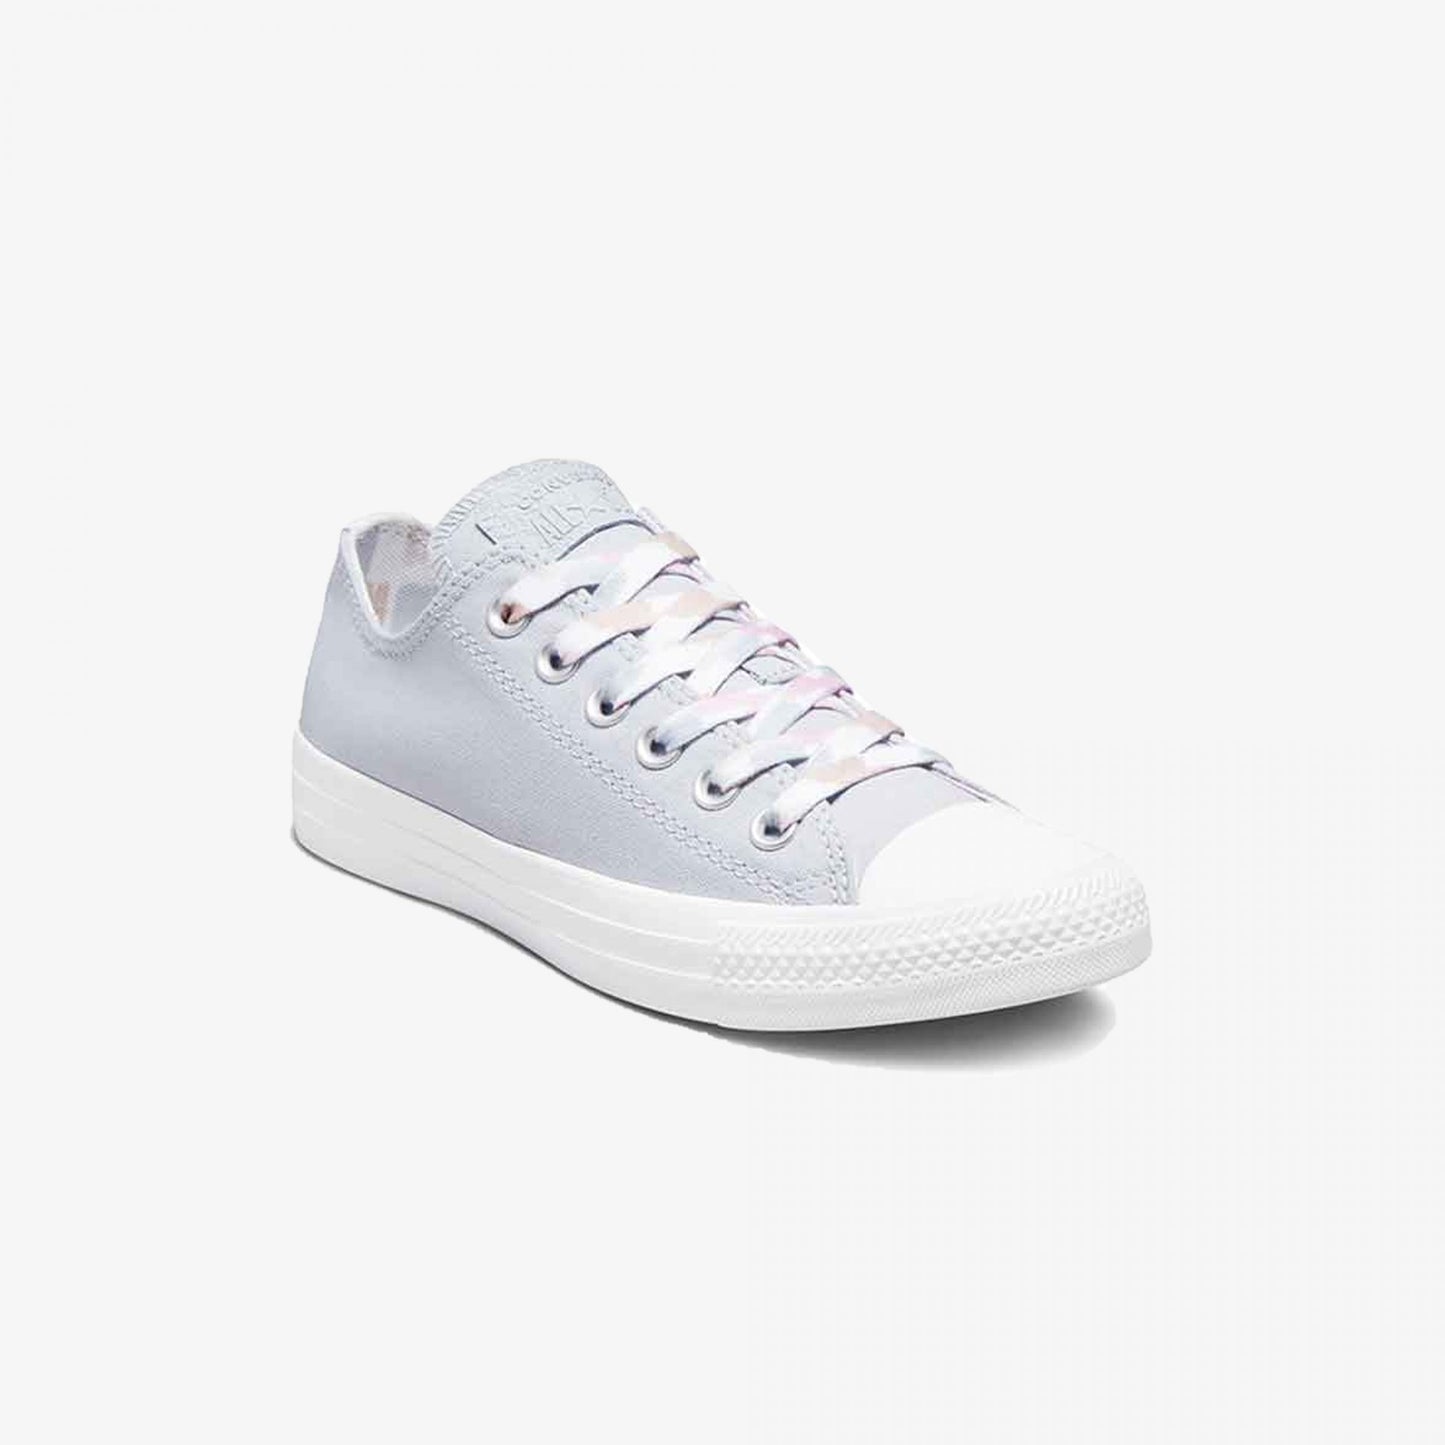 WMN'S INKED - CHUCK TAYLOR ALL STAR 2 PACK IN CANVAS CHOCLO 'GREY'